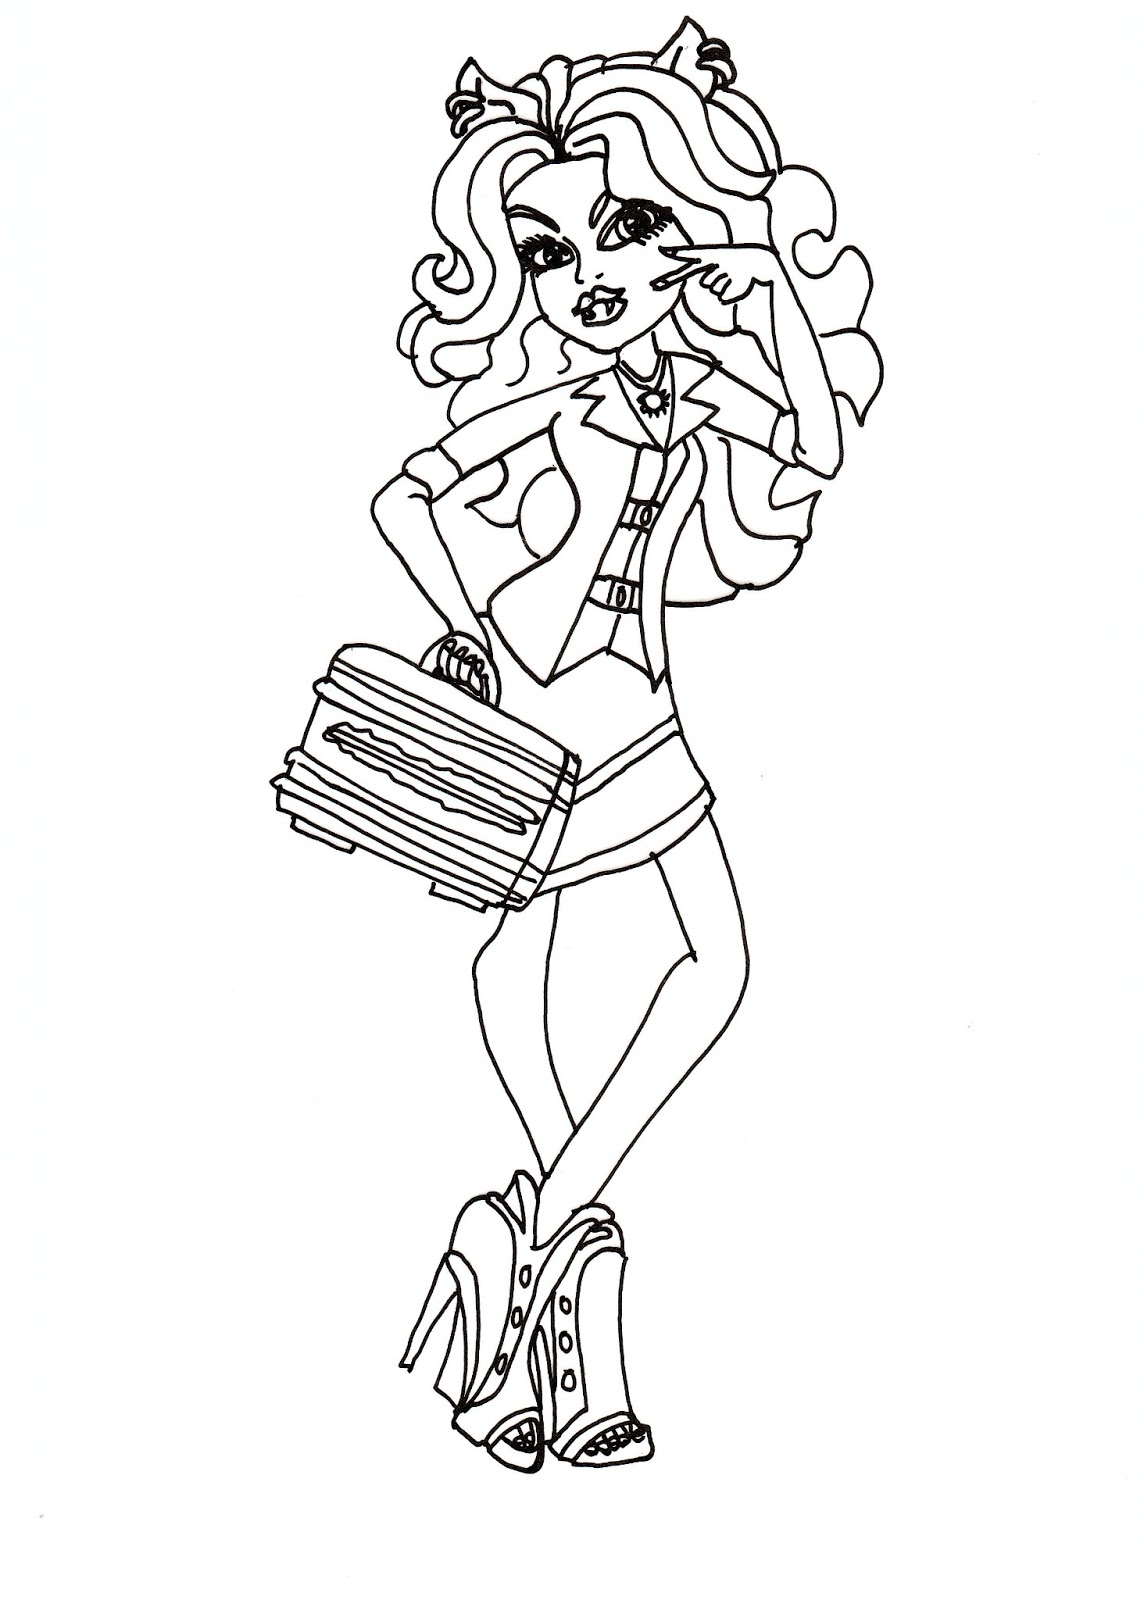 Clawdeen Entrepreneur Fashion Coloring Sheet CLICK HERE TO PRINT Free printable monster high Clawdeen Wolf Entrepreneurs Club Fashion Outfit coloring